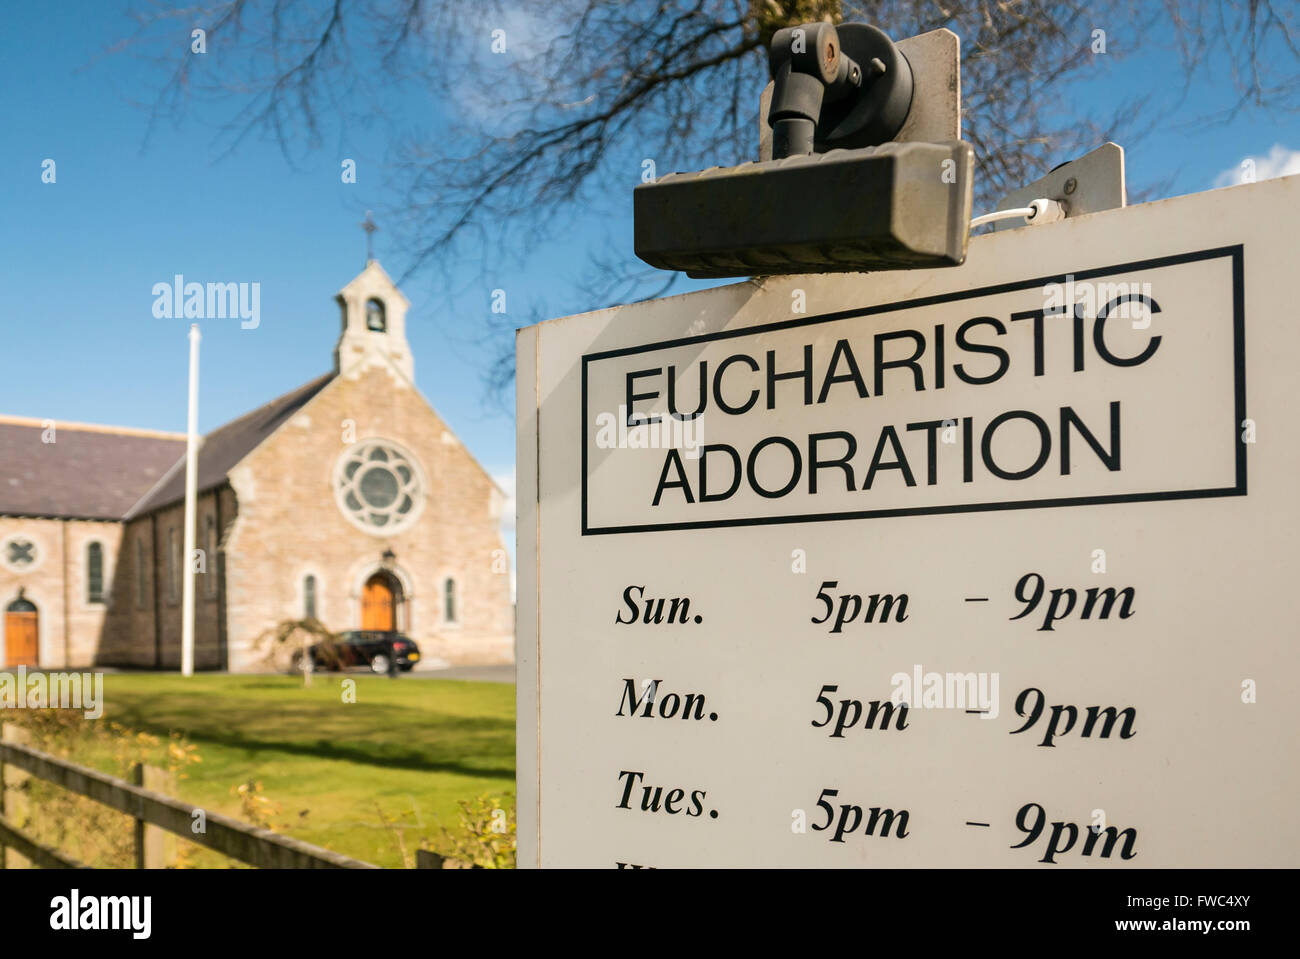 Sign outside a Catholic Church giving times for Eucharistic Adoration. Stock Photo